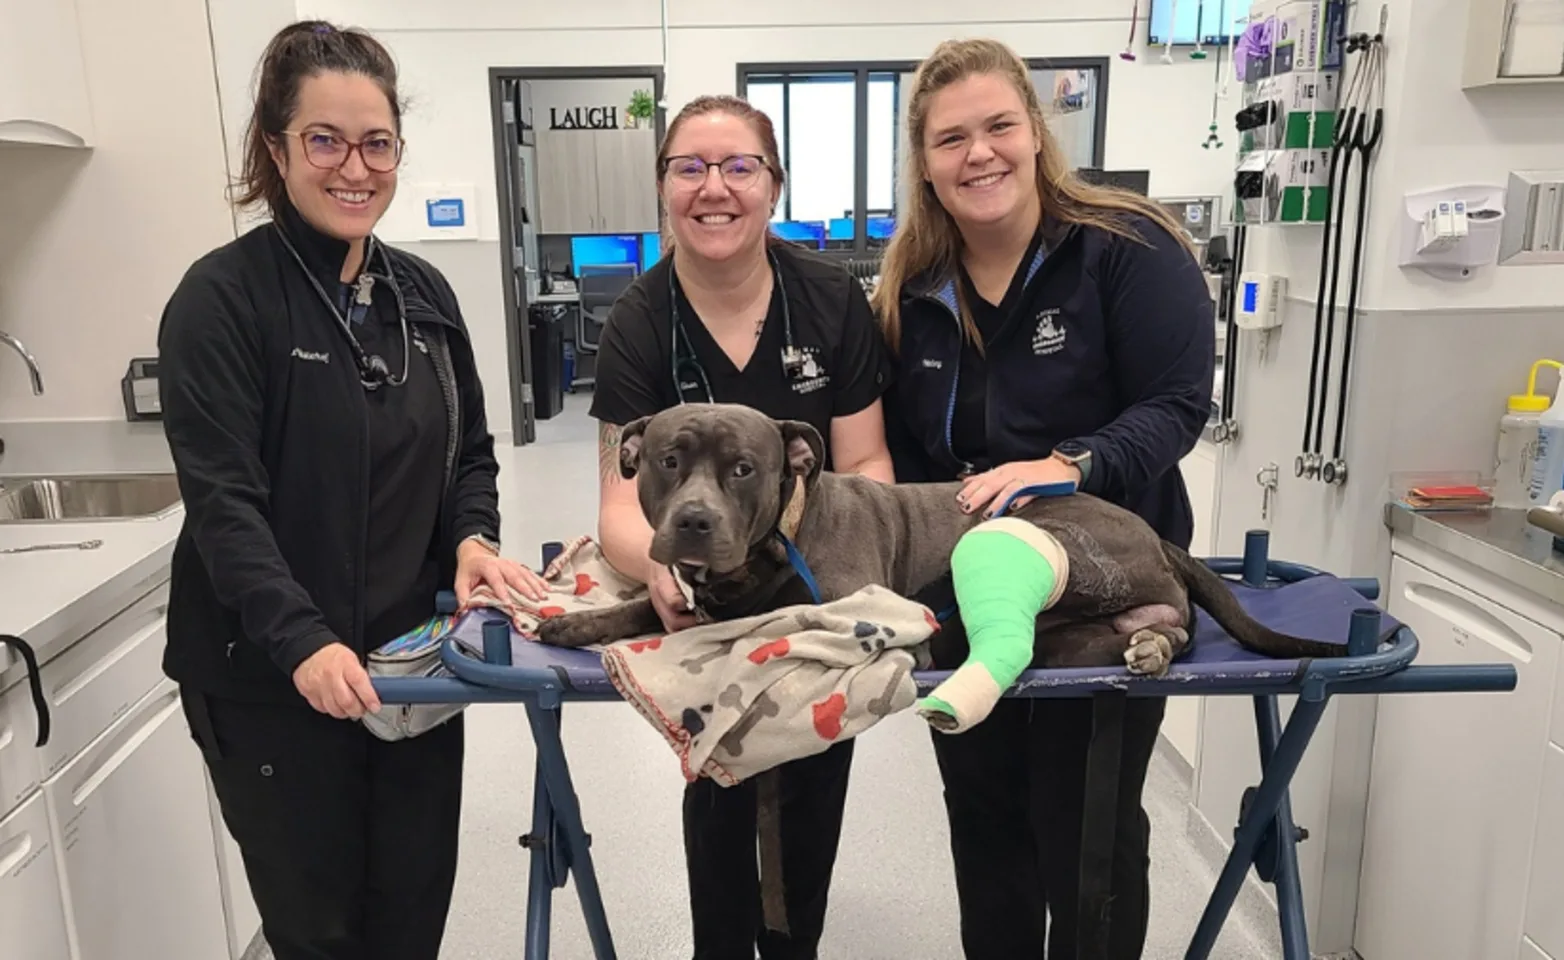 Staff members with dog in cast.